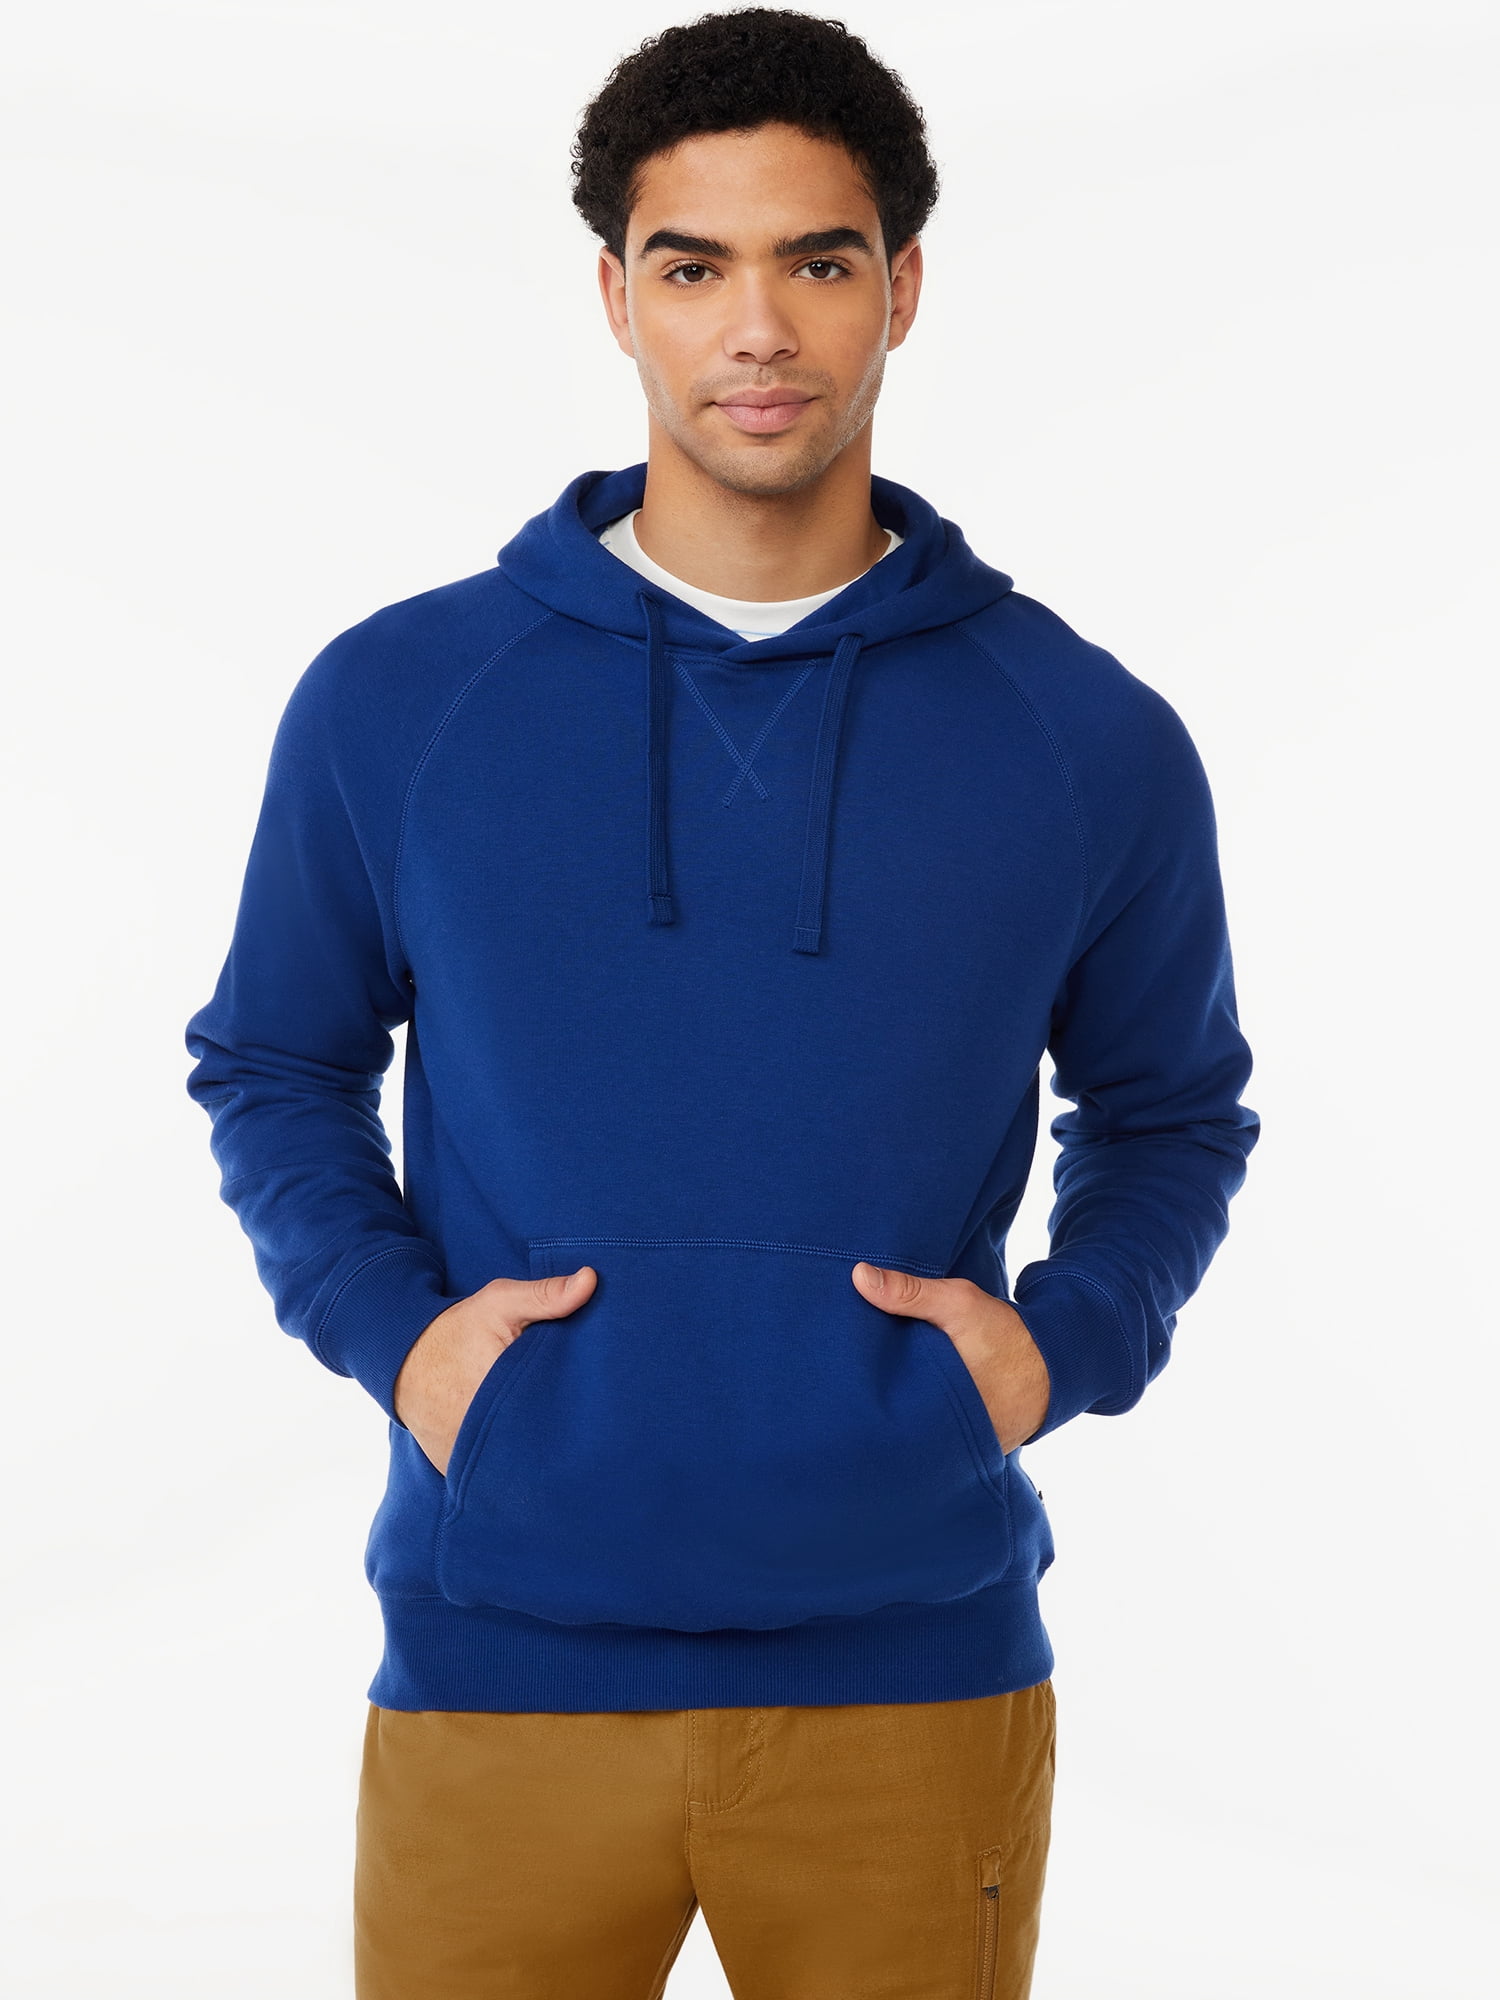 Free Assembly Men's Coverstitch Hoodie with Raglan Sleeves - Walmart.com